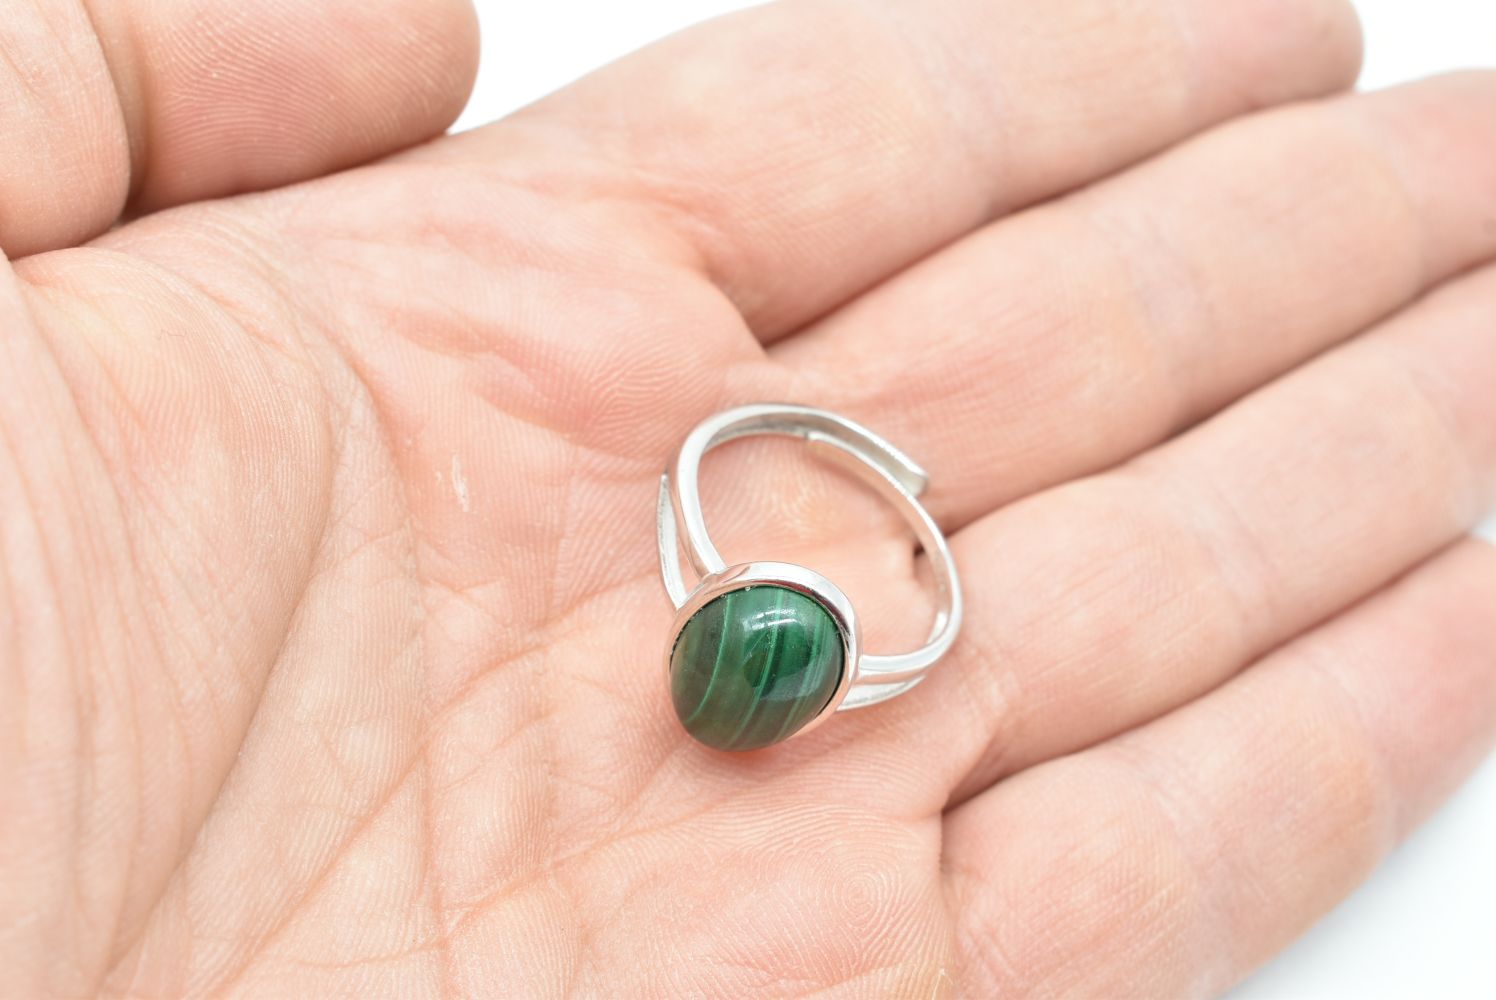 Ring with Malachite stone and 925 silver - Adjustable